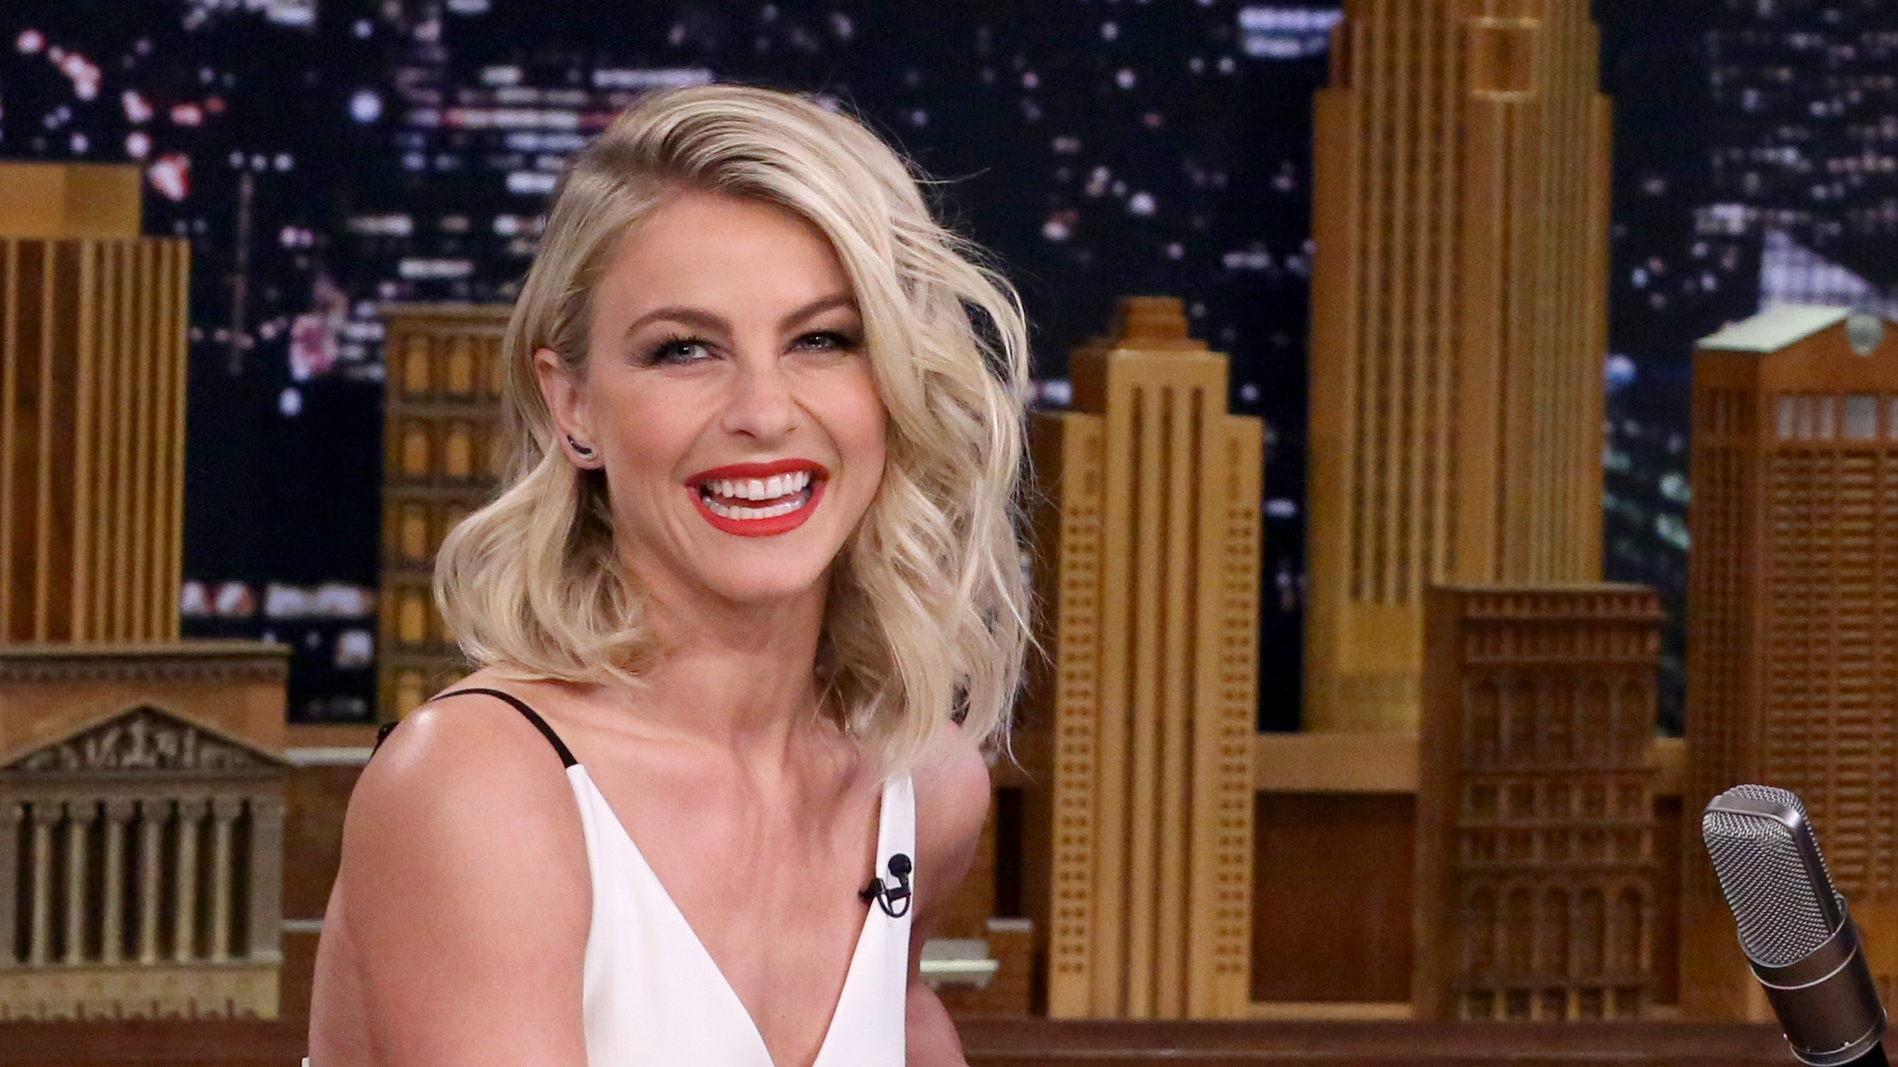 Who Is Julianne Hough Fun Facts About The Dwts Professional Dancer